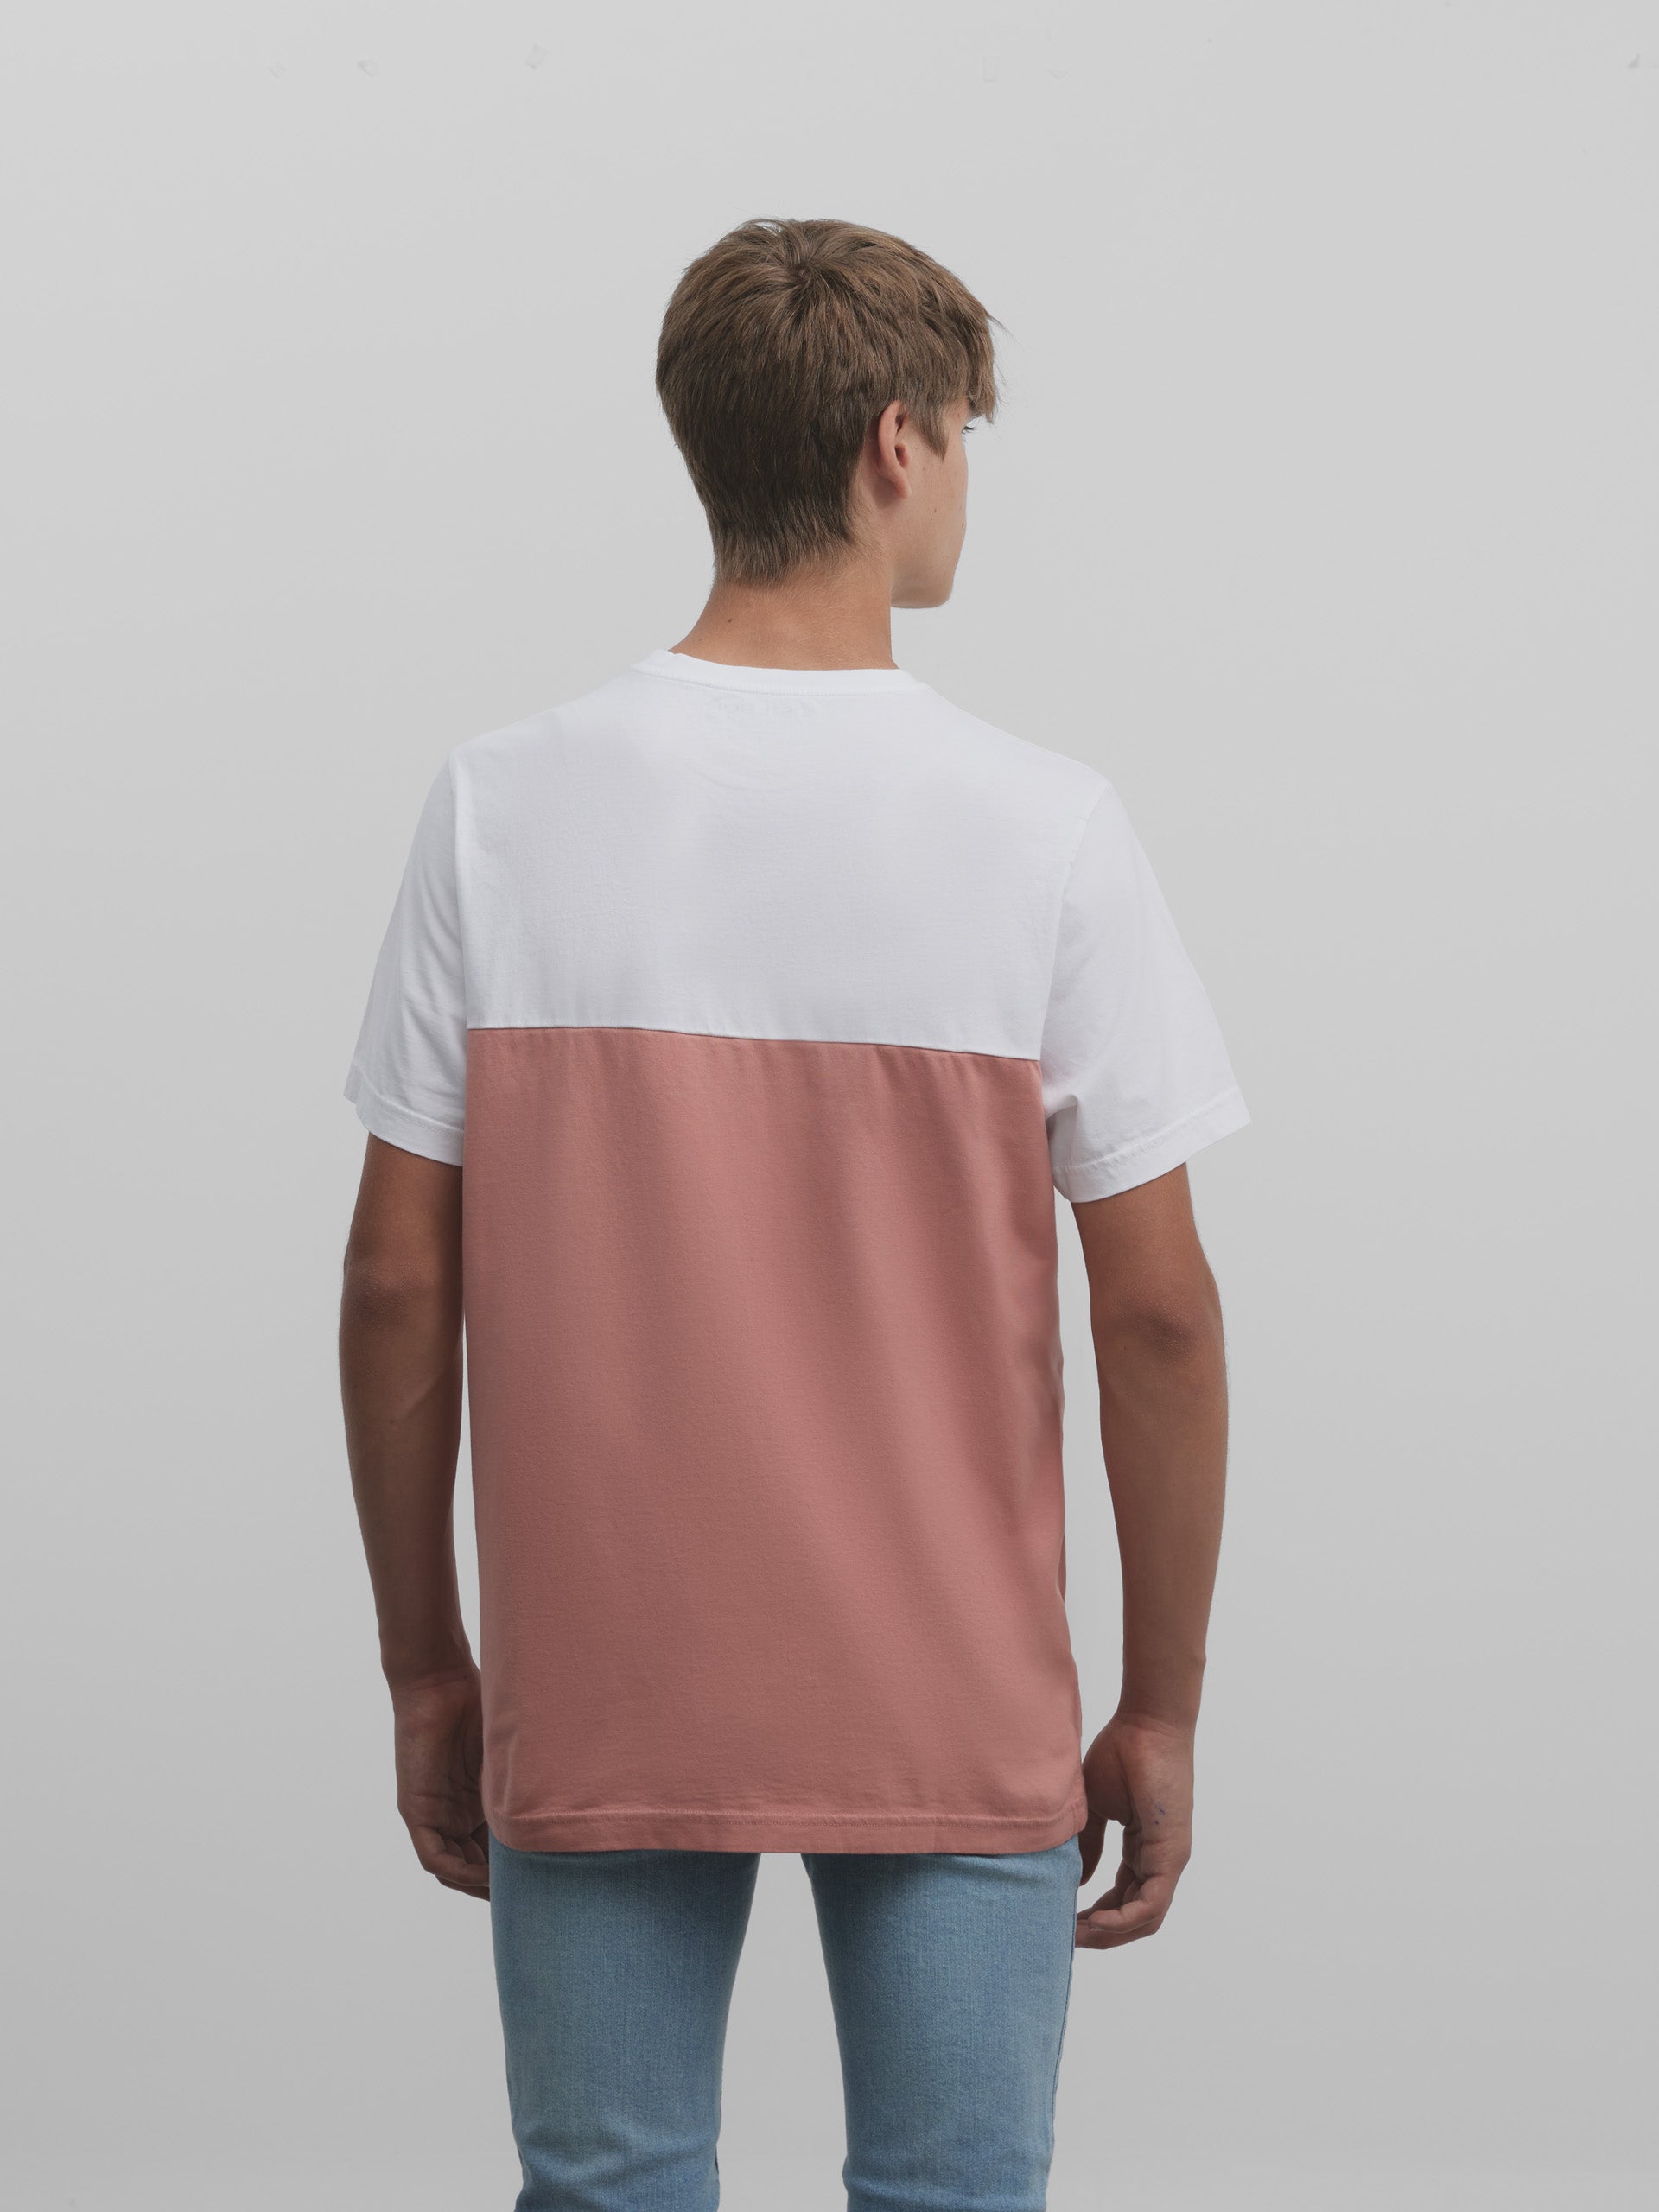 Two-tone white coral t-shirt